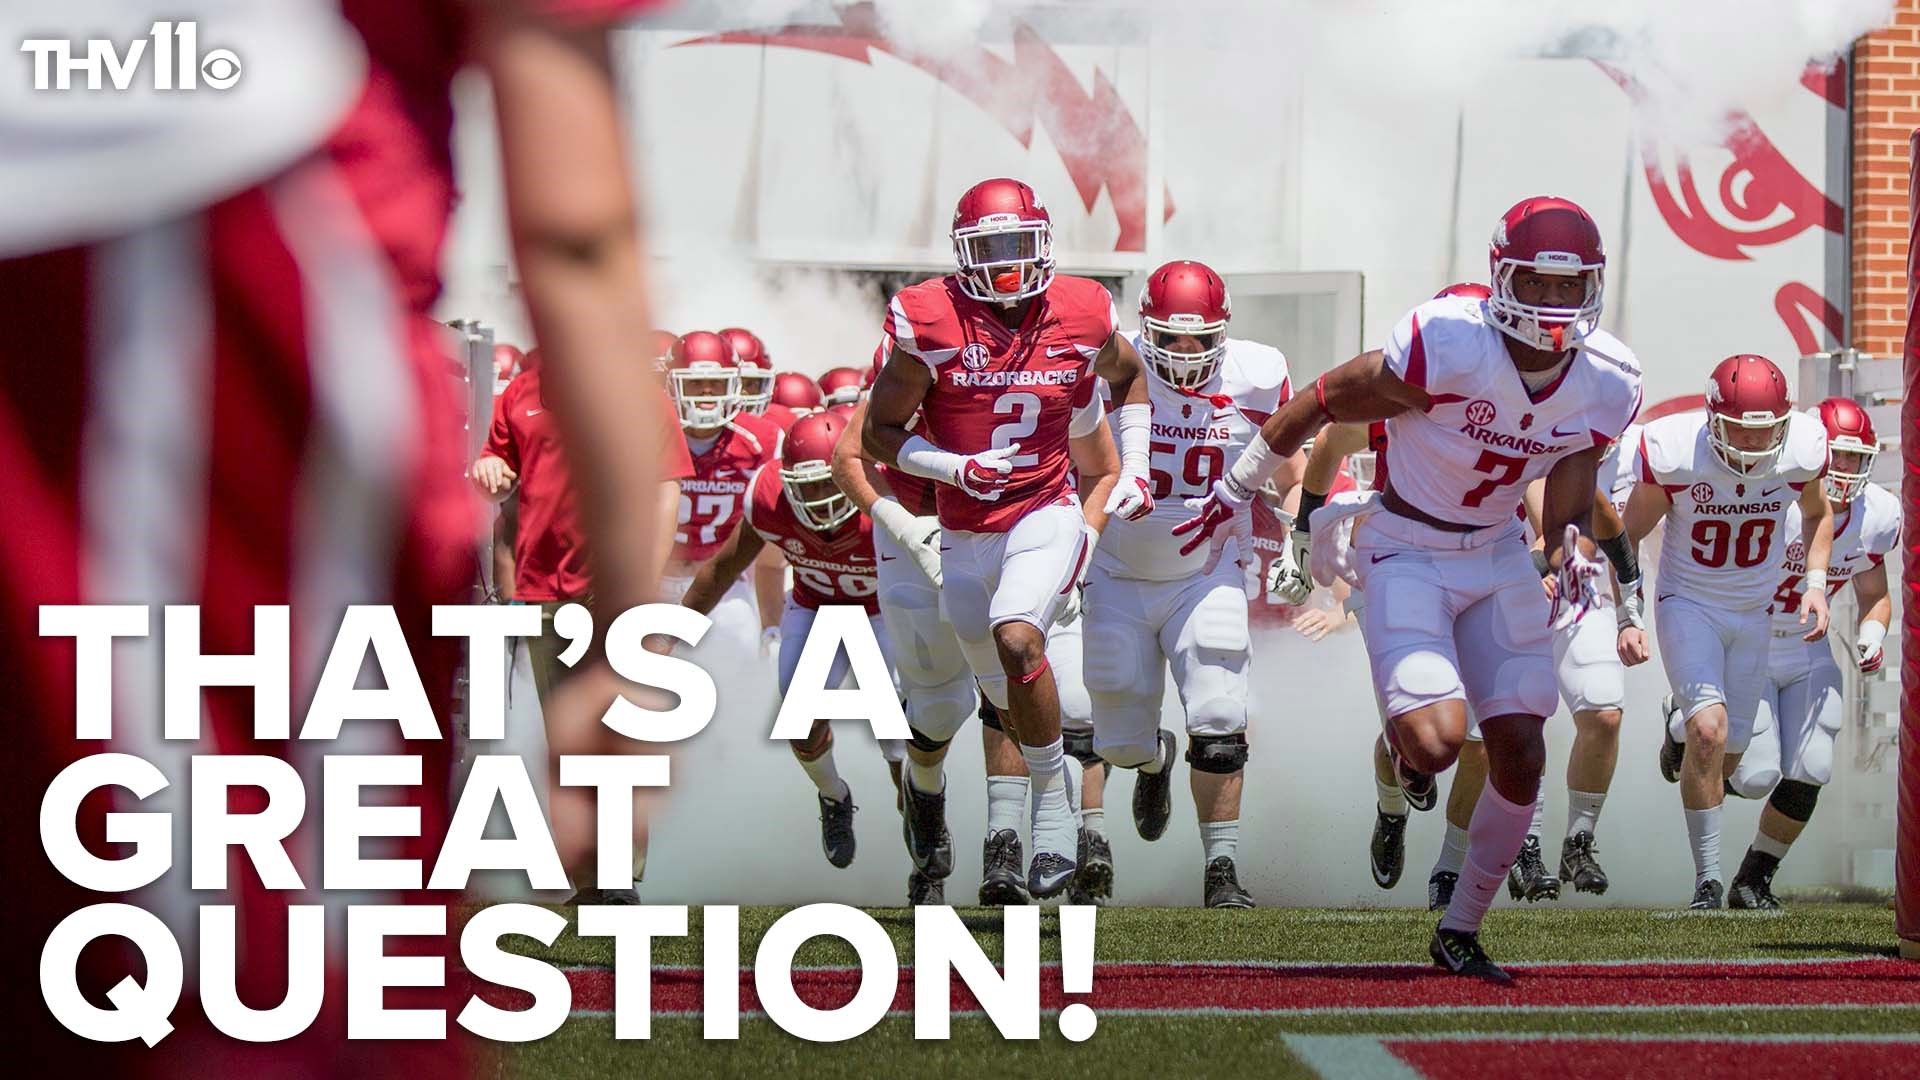 Just three days ahead of kickoff, we take a look at the Razorbacks and find out how the beloved sports team got their name.